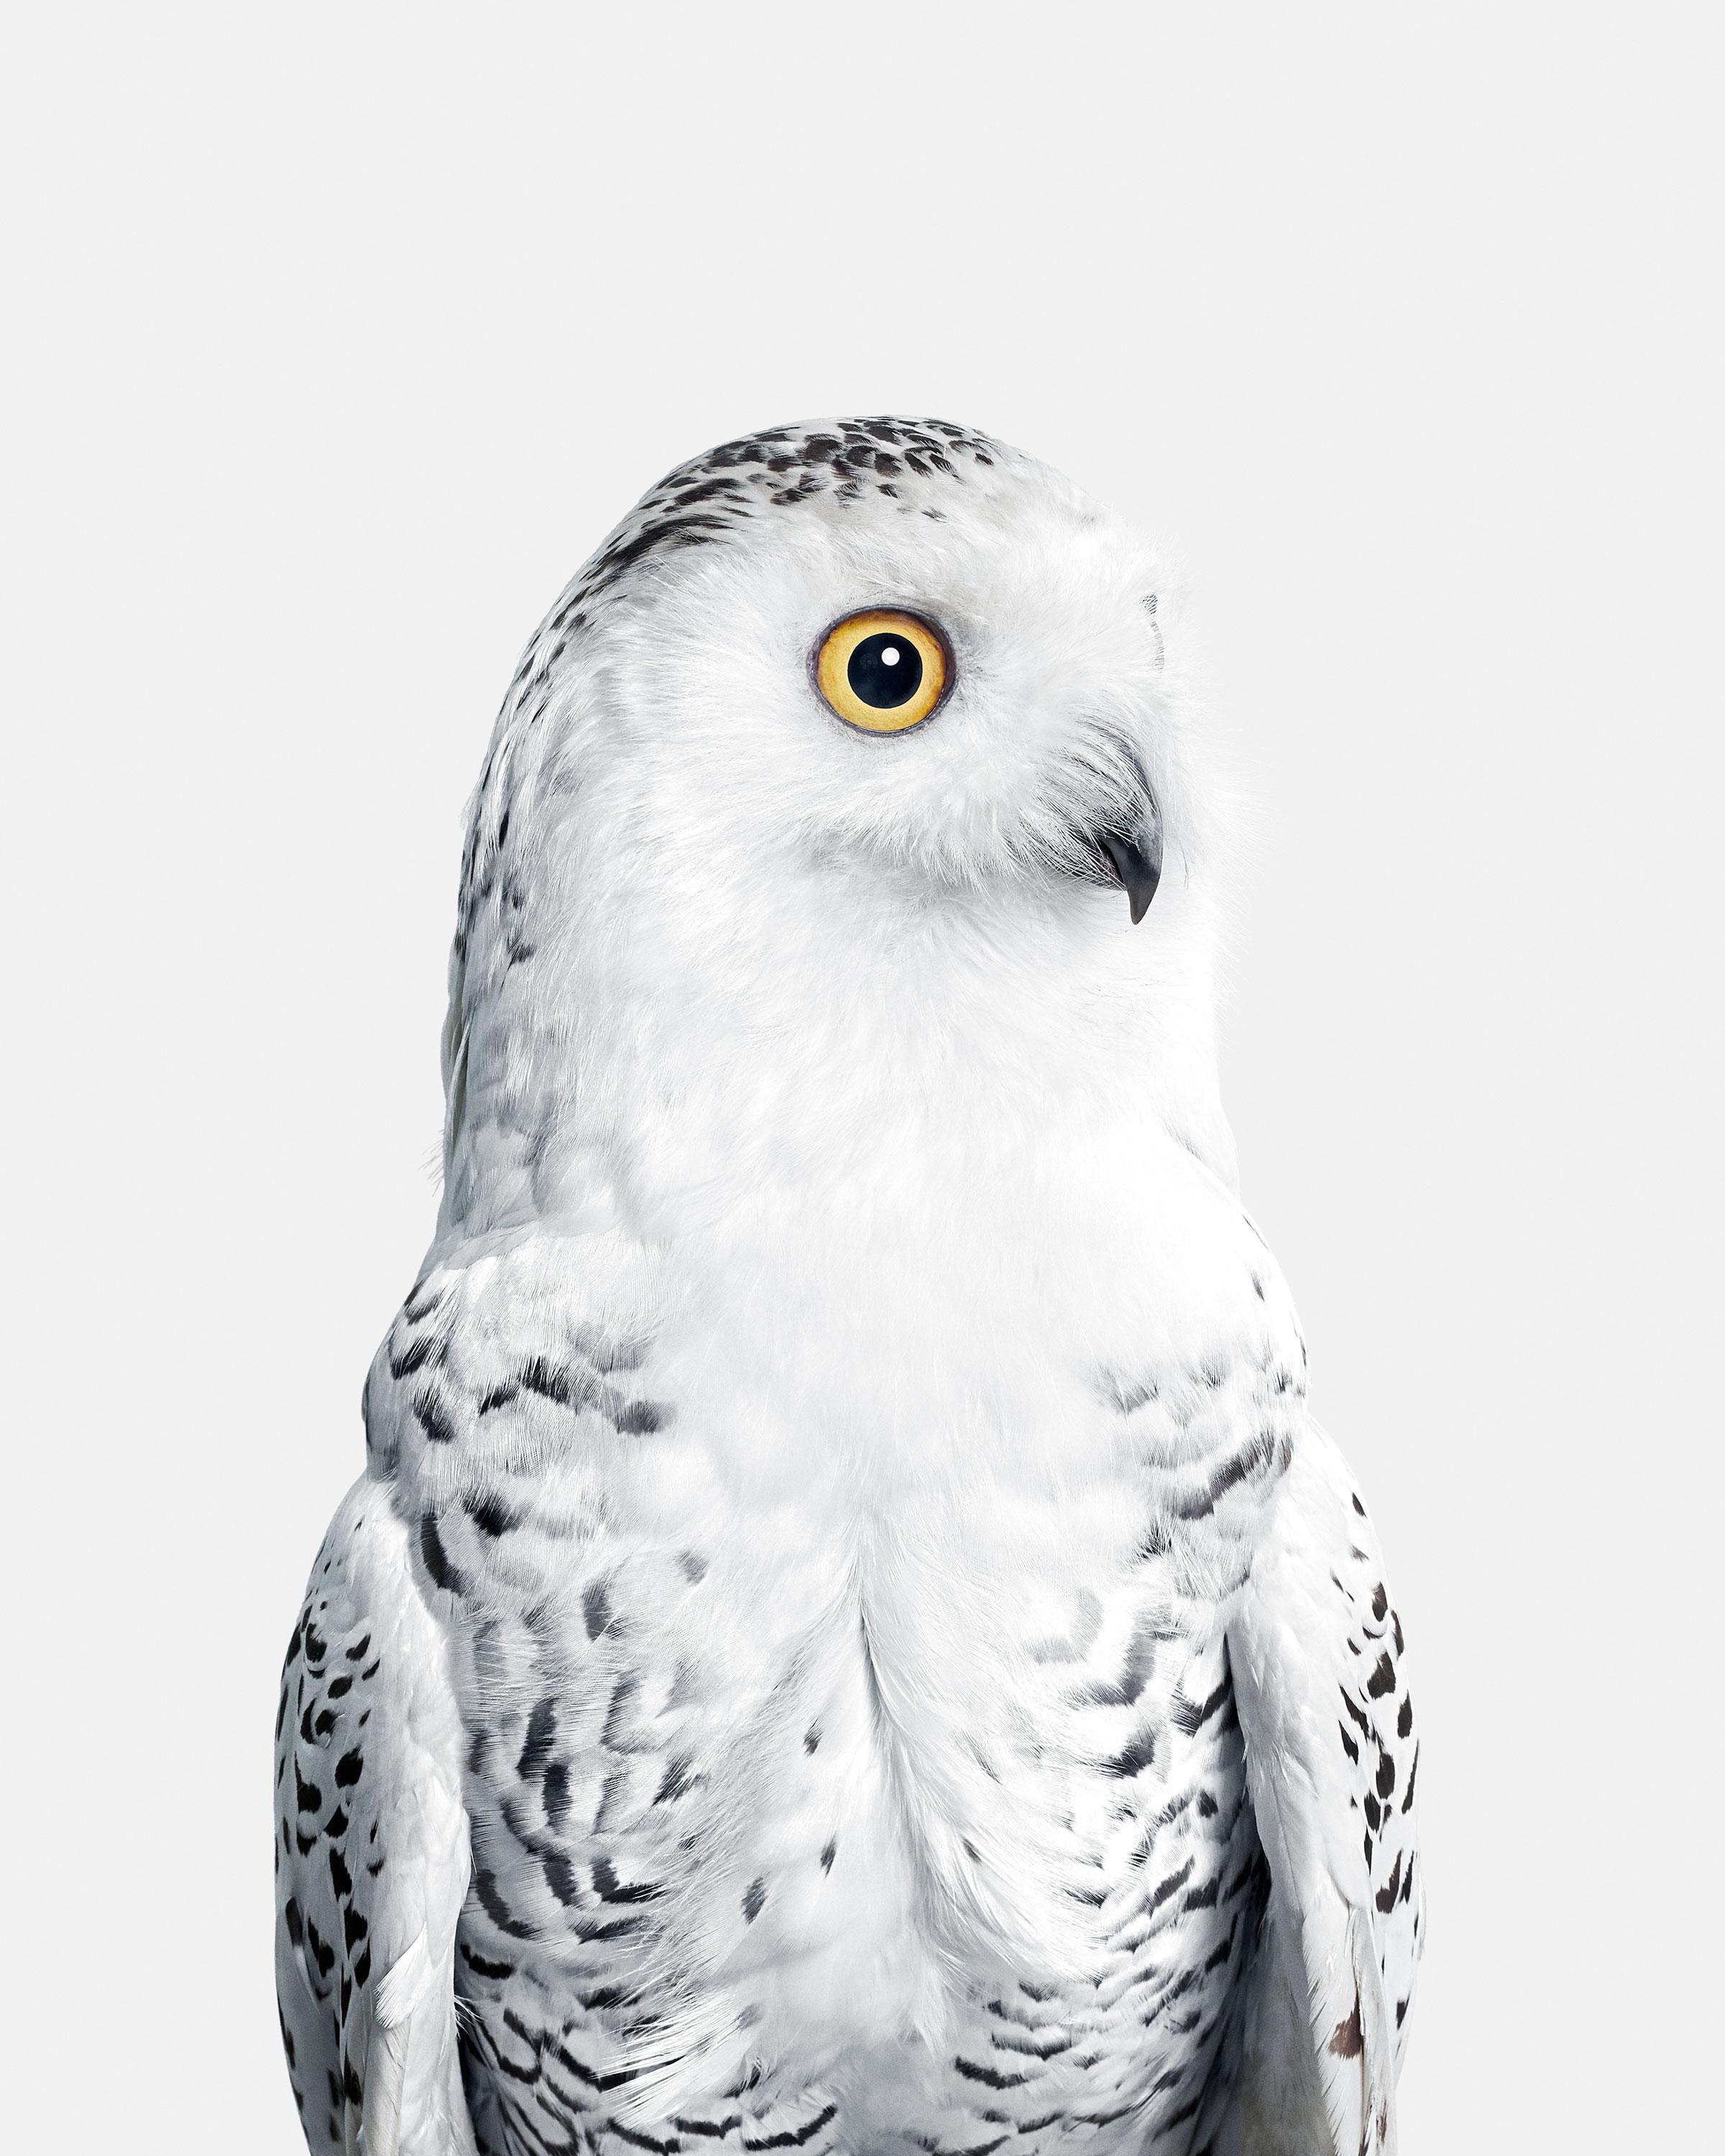 Randal Ford Color Photograph - Snowy Owl No. 1 (37.5" x 30")